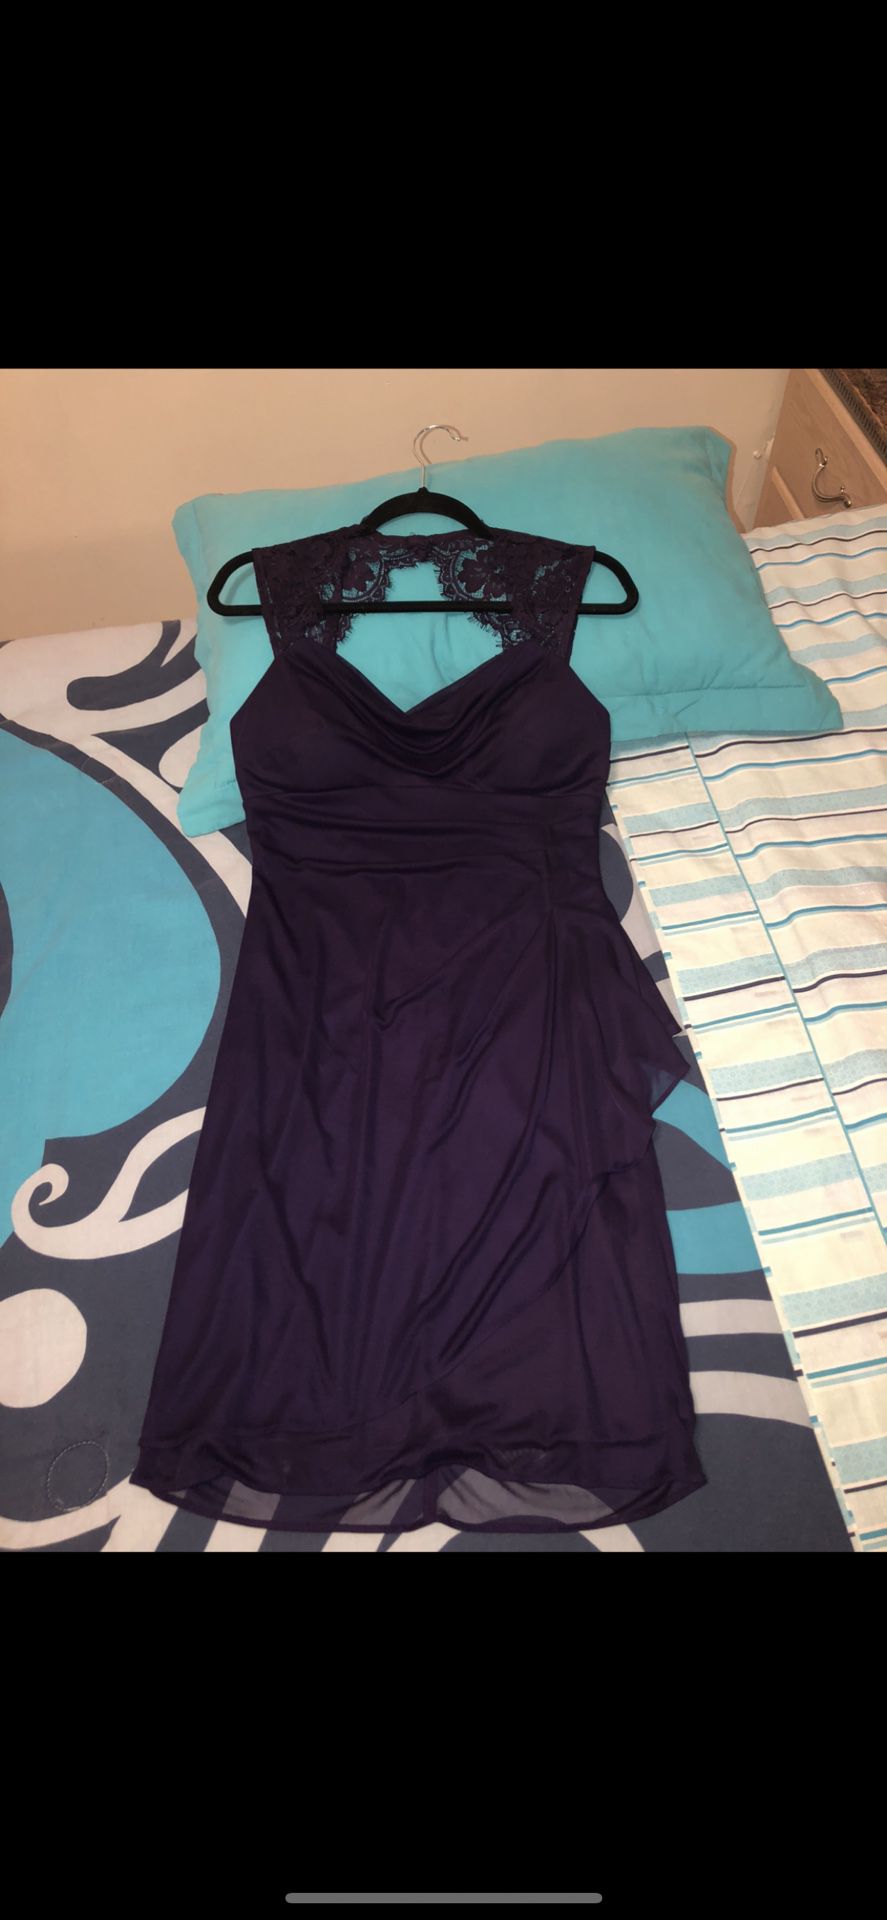 Scarlett Dress 👗 Size Medium, Good Conditions Used Once 